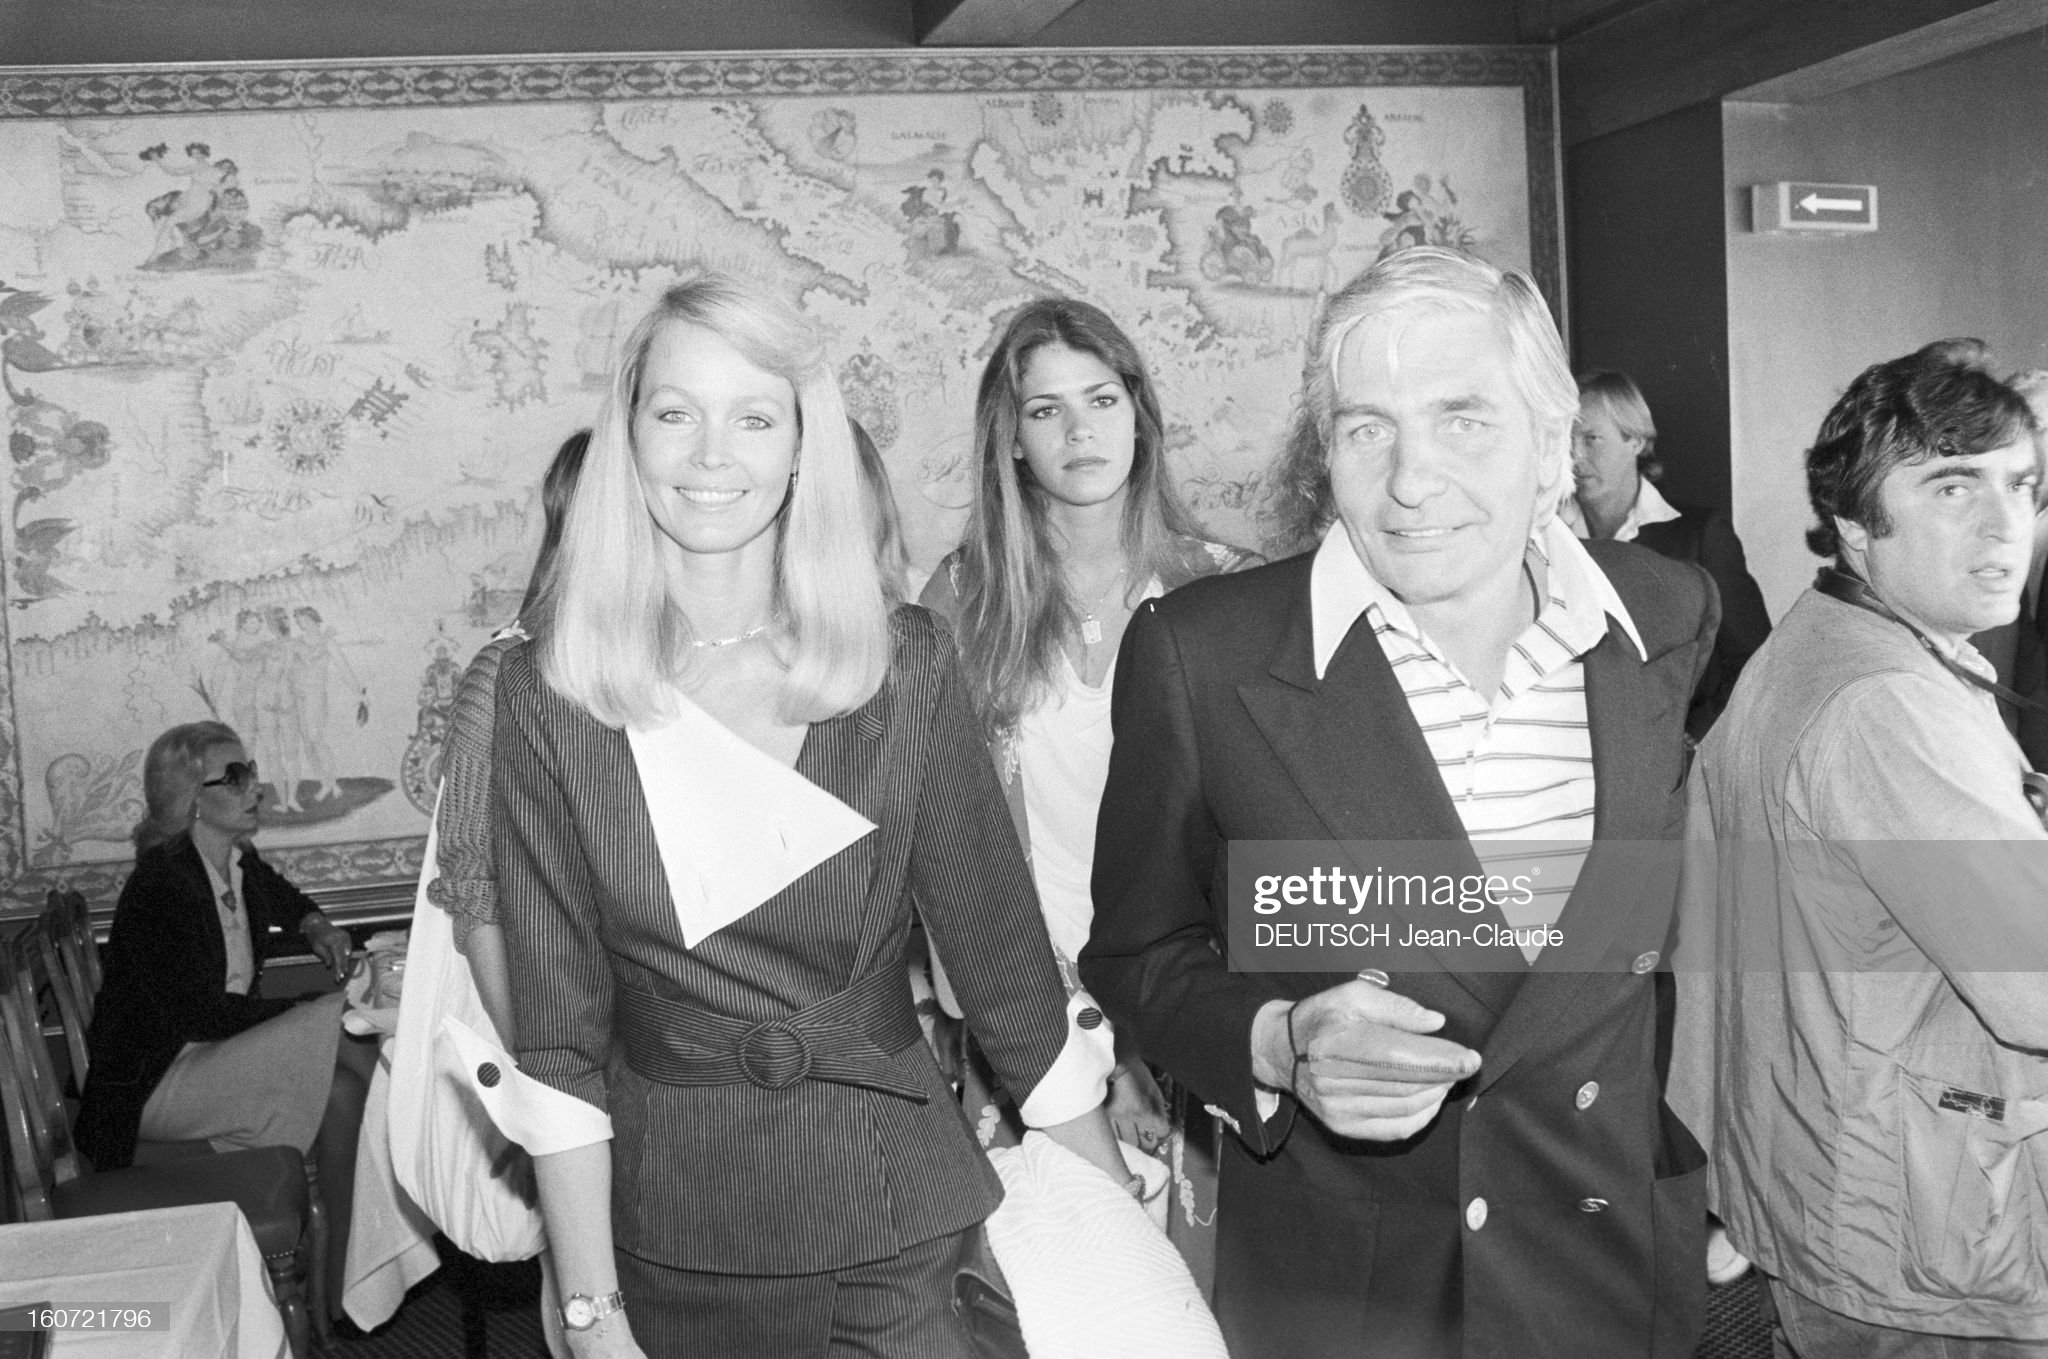 May 18, 1980, at the reception of Fred Chandon during the Monaco Formula 1 Grand Prix, Gunther Sachs and his Swedish wife Mirja Larsson. 